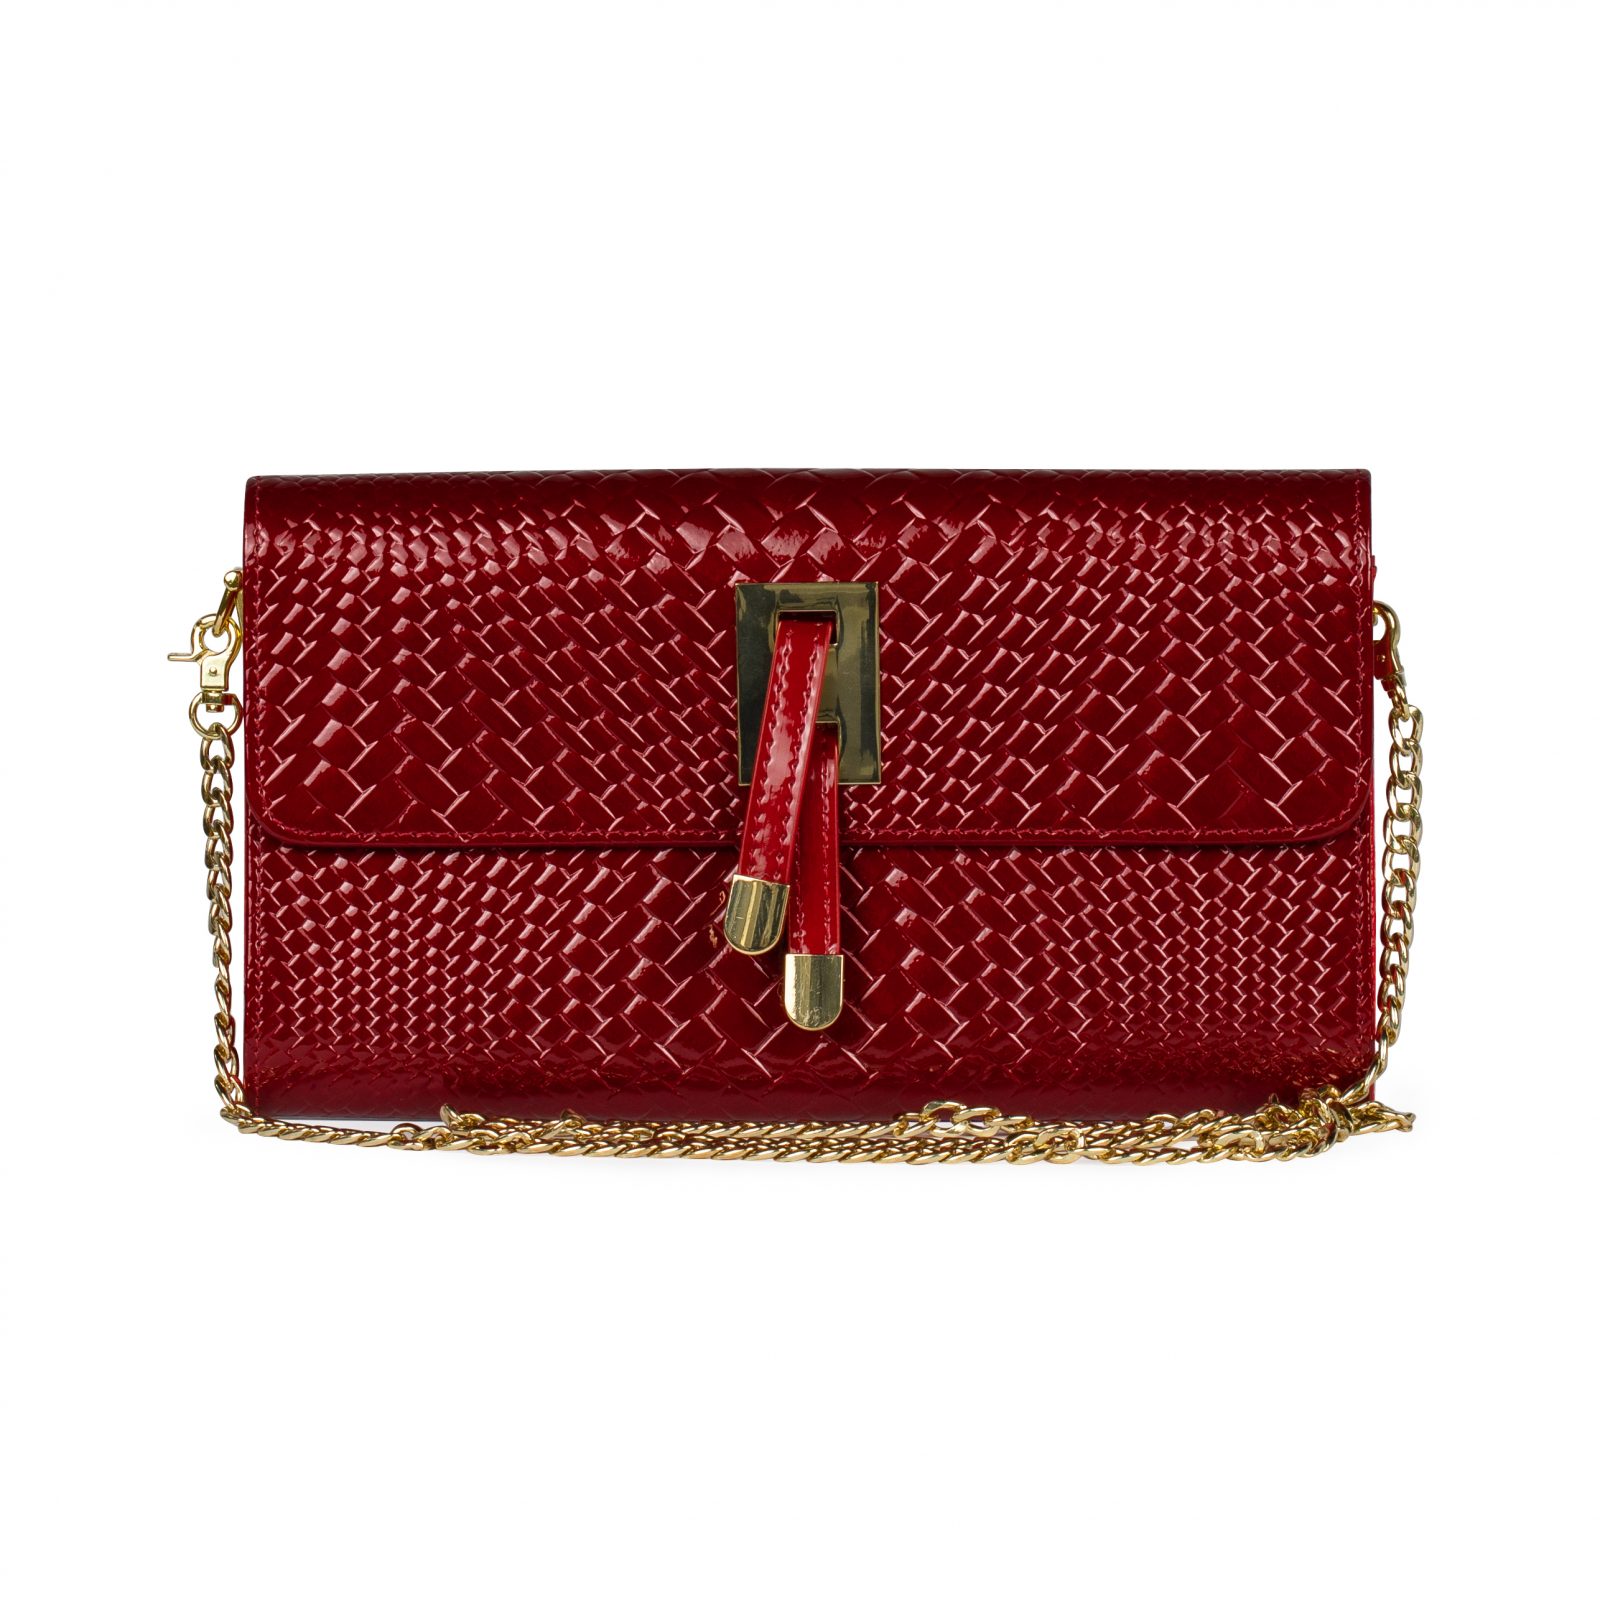 EMBOSSED-LEATHER EVENING BAG CLASSY RED – CHICZ